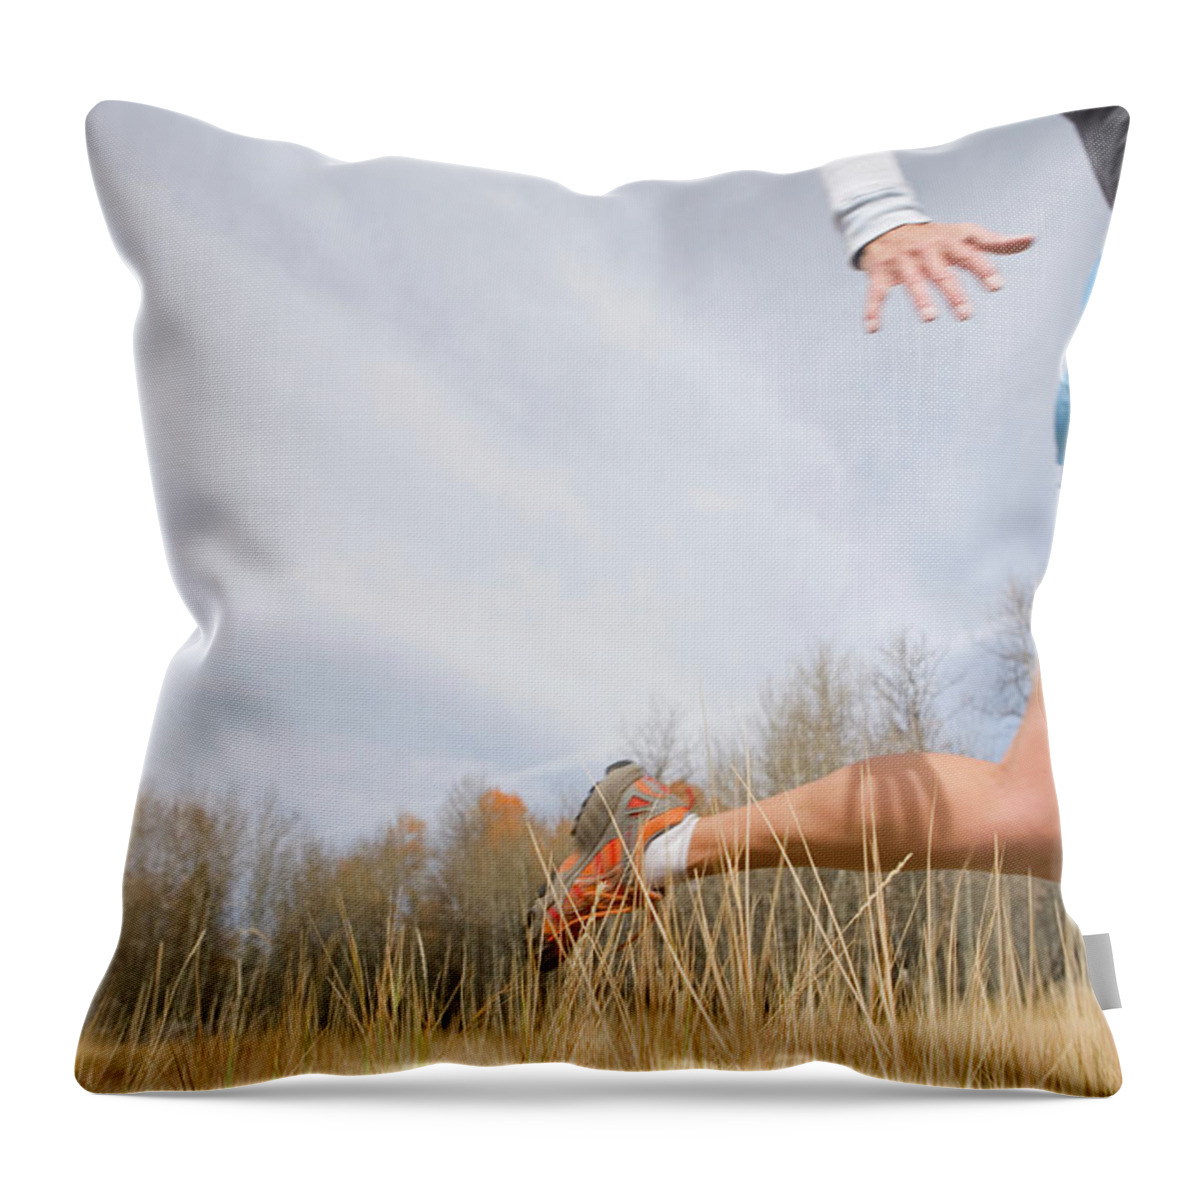 Grass Family Throw Pillow featuring the photograph Mature Woman Running Through Tall by Caroline Woodham